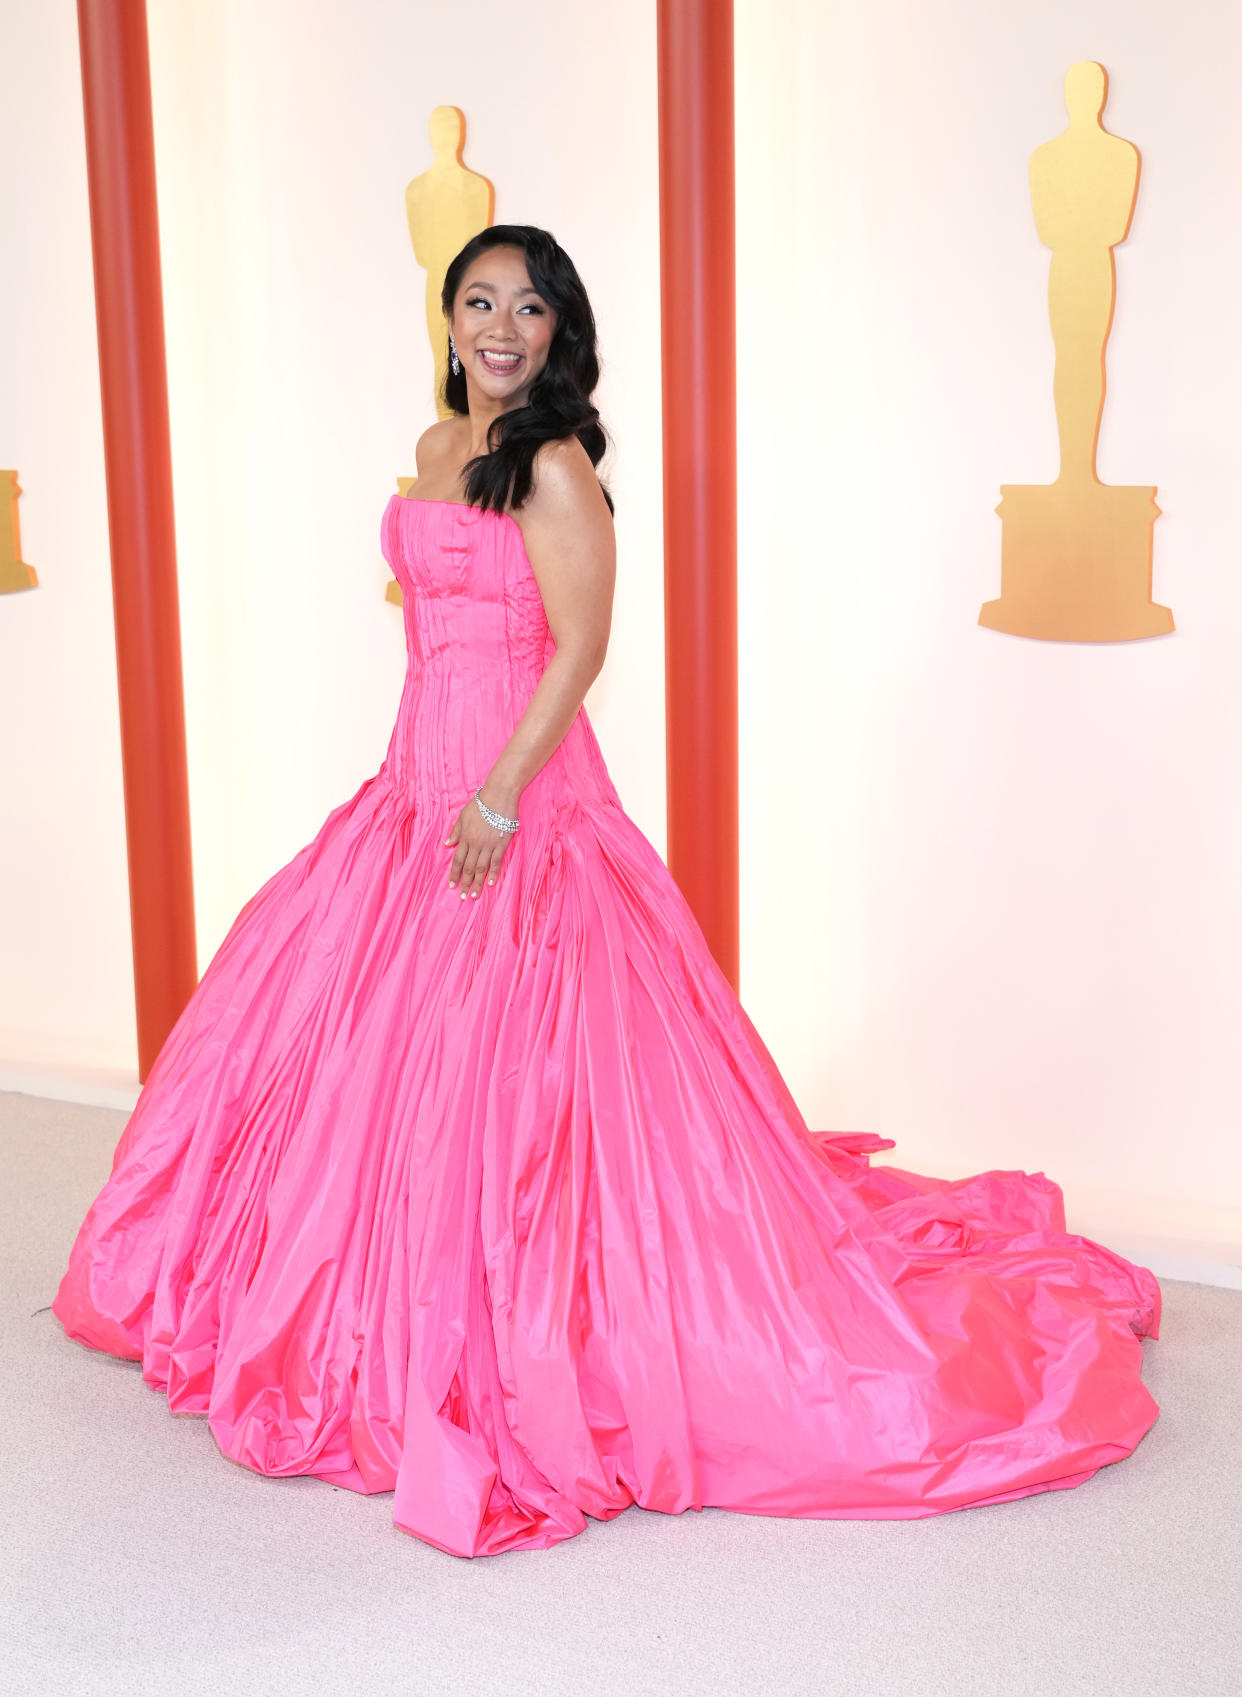 HOLLYWOOD, CALIFORNIA - MARCH 12: Stephanie Hsu attends the 95th Annual Academy Awards on March 12, 2023 in Hollywood, California. (Photo by Kevin Mazur/Getty Images)